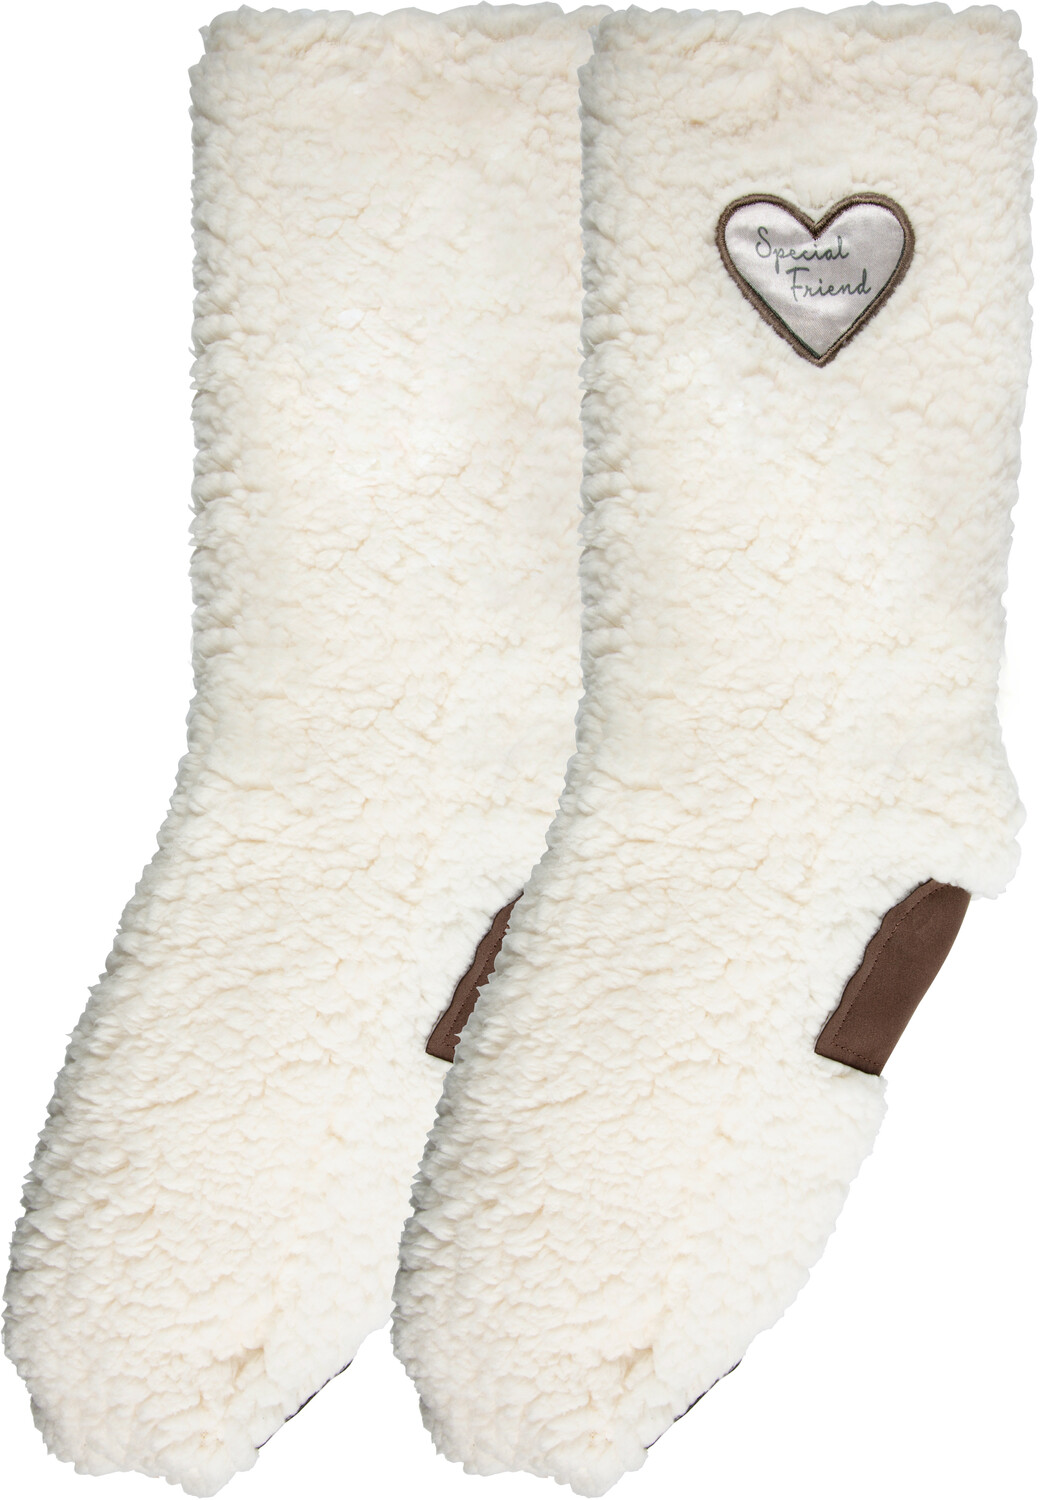 Special Friend by Comfort Collection - Special Friend - One Size Fits Most Sherpa Slipper